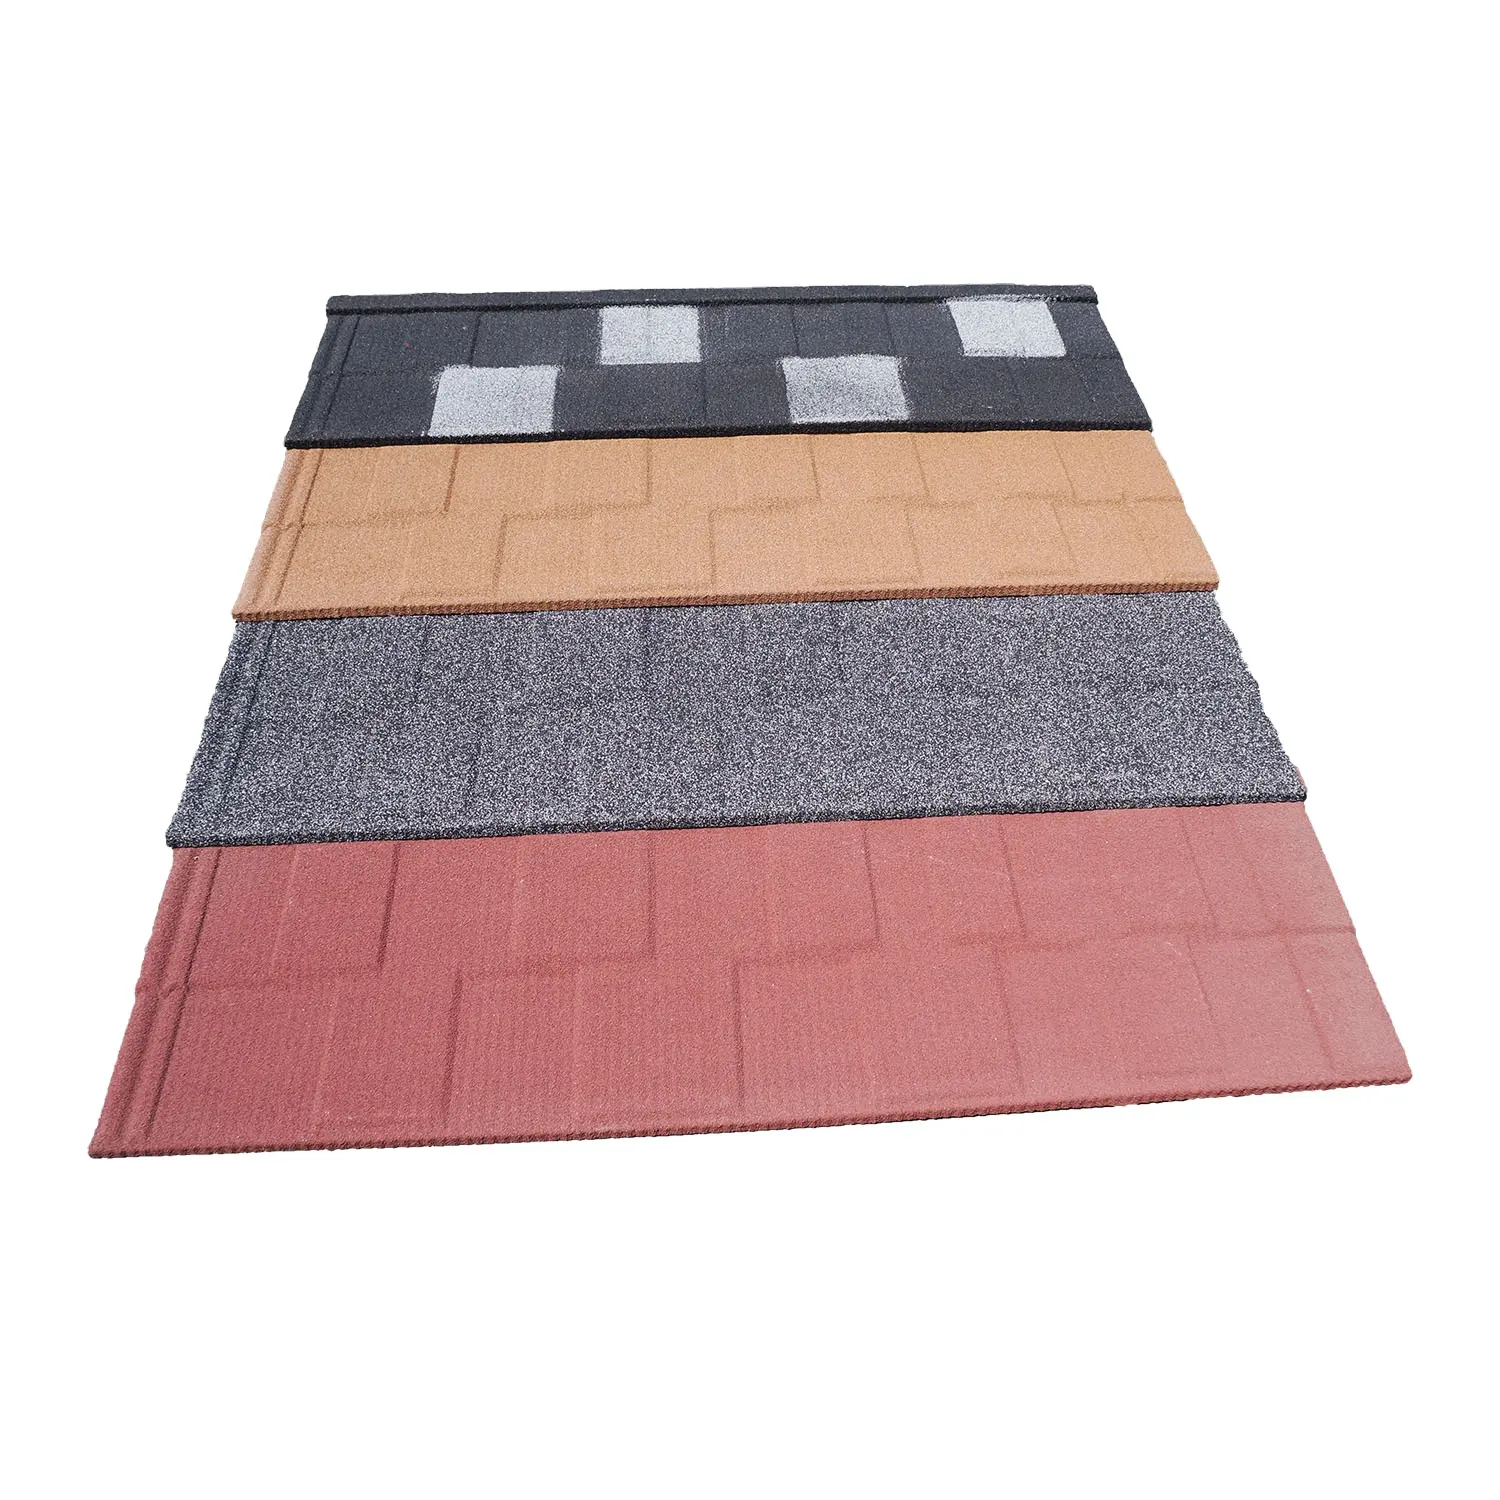 Heat Insulation Popular Metal Stone Coated Roof Tile Building Materials High Quality Hot Selling Stone Coated Metal Roof Sheet